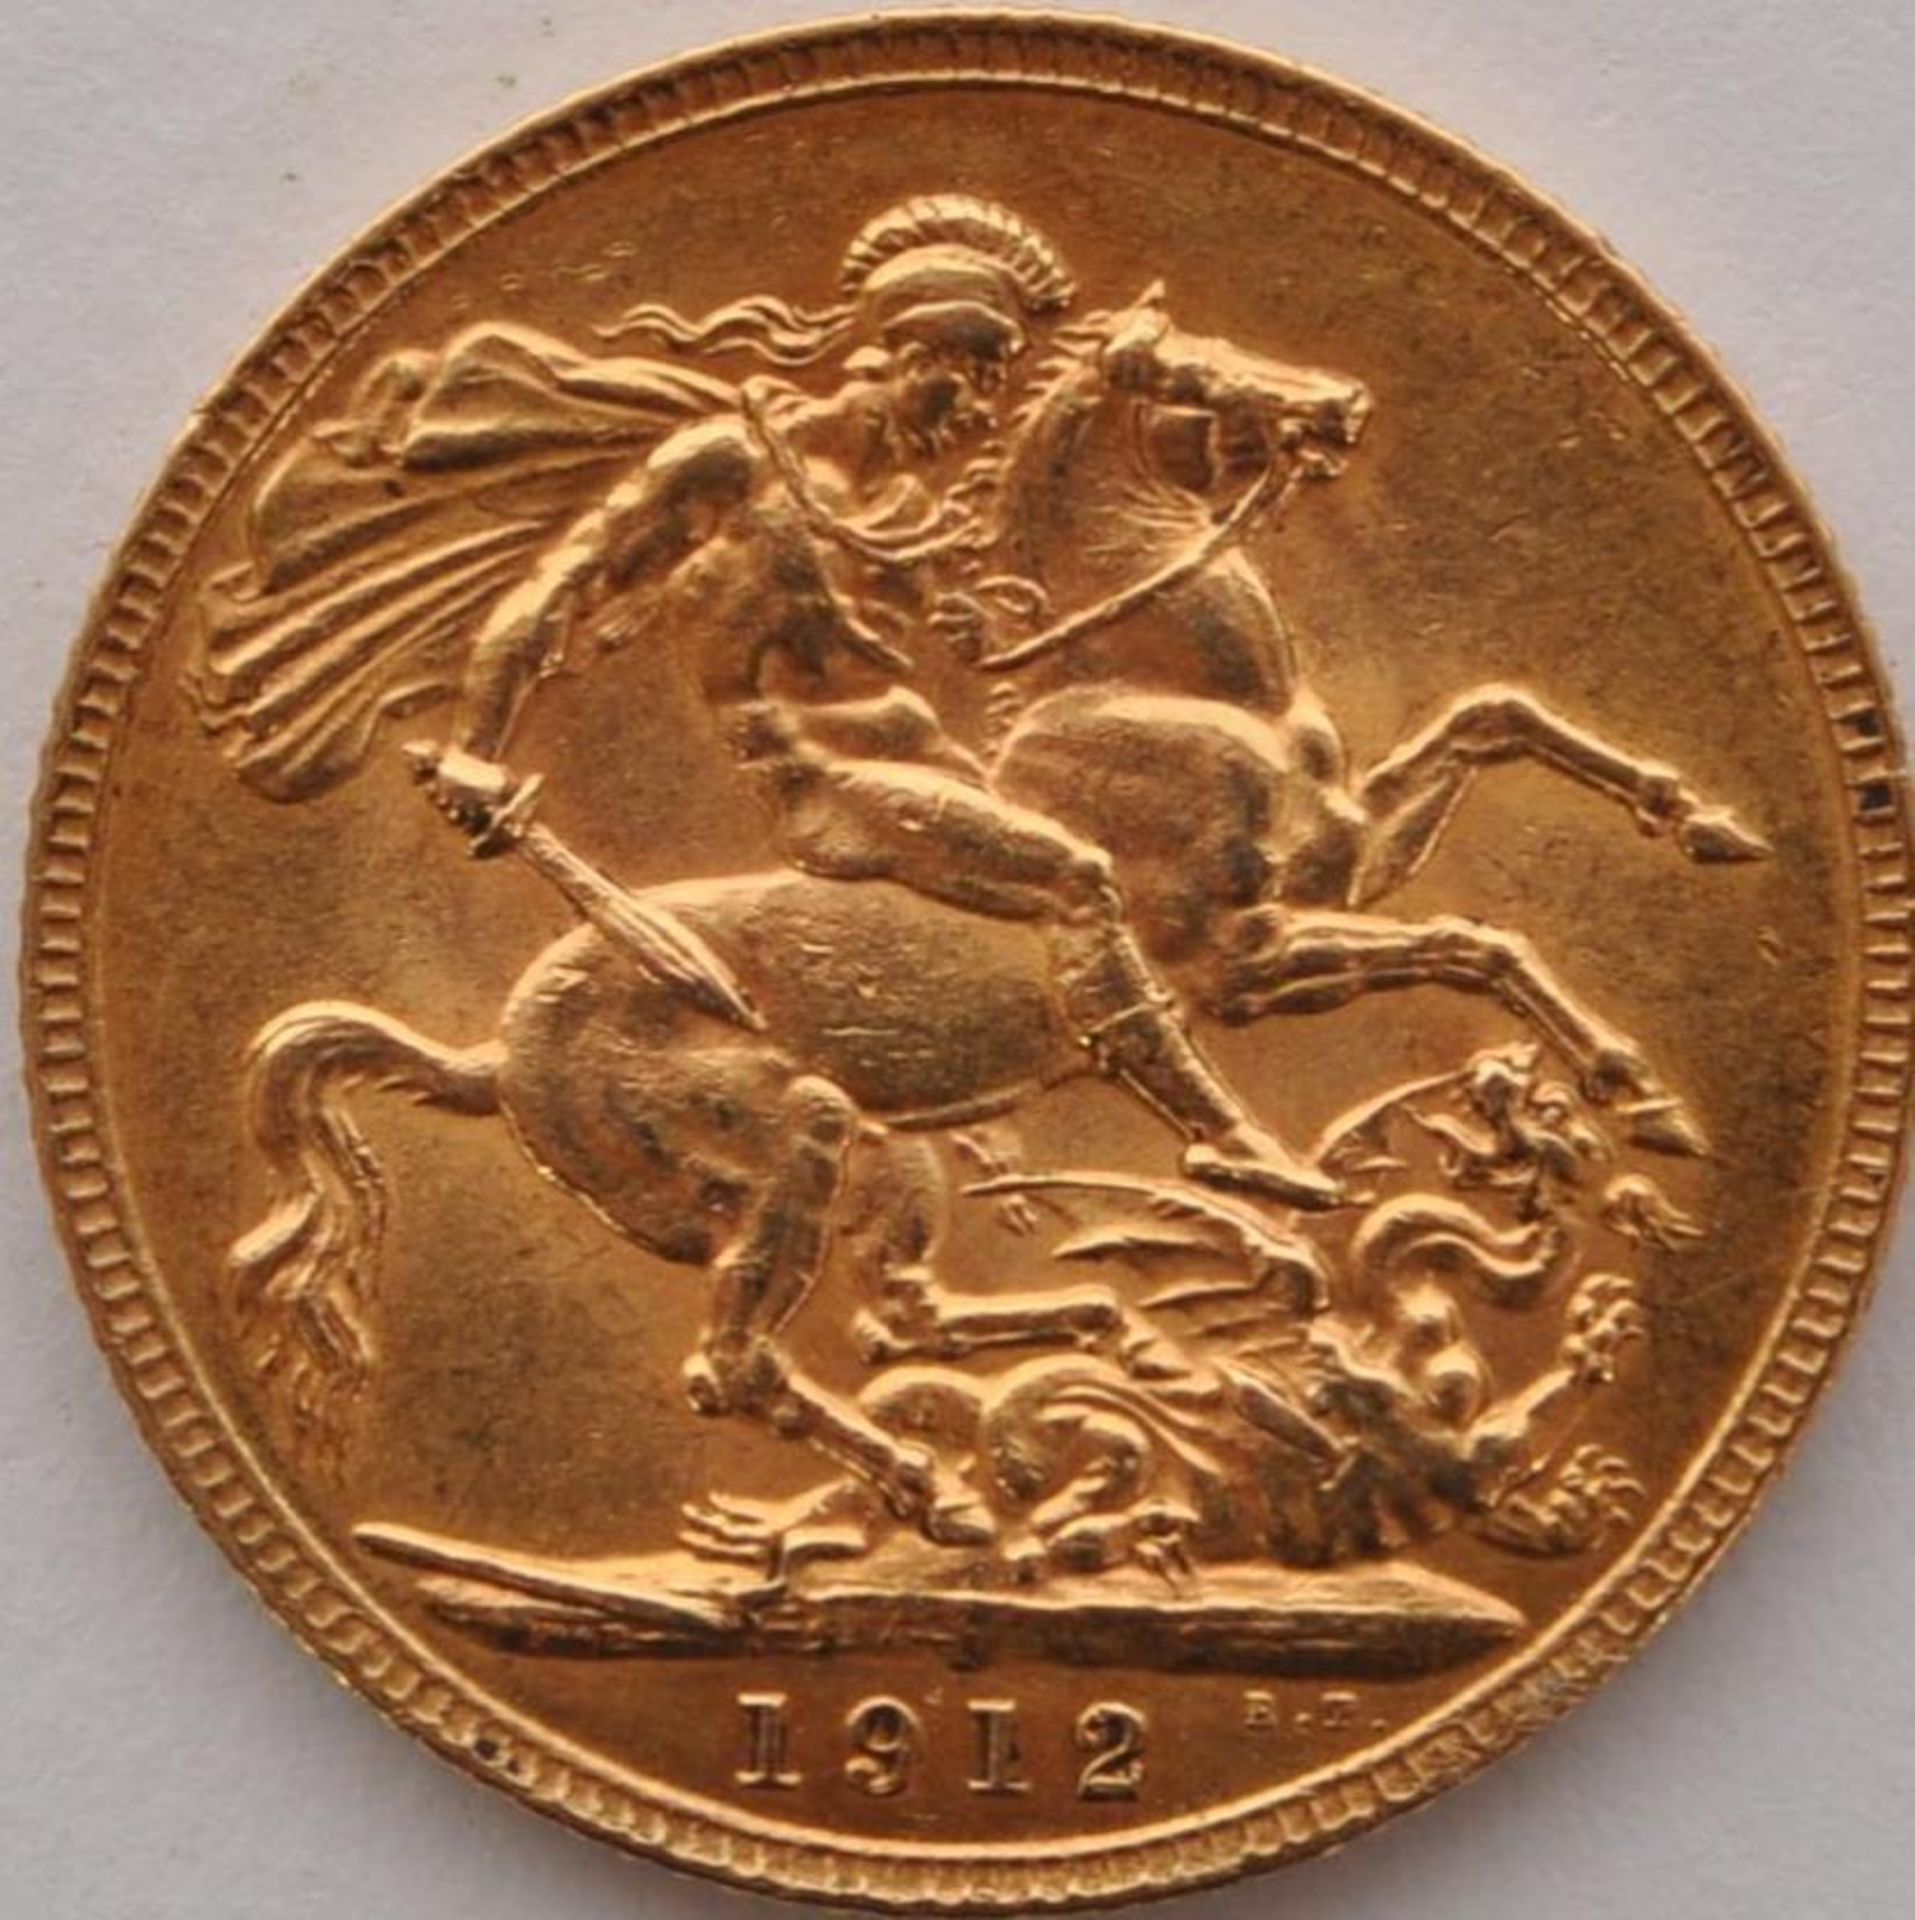 22CT GOLD 1912 GEORGE V FULL SOVEREIGN COIN - Image 2 of 4